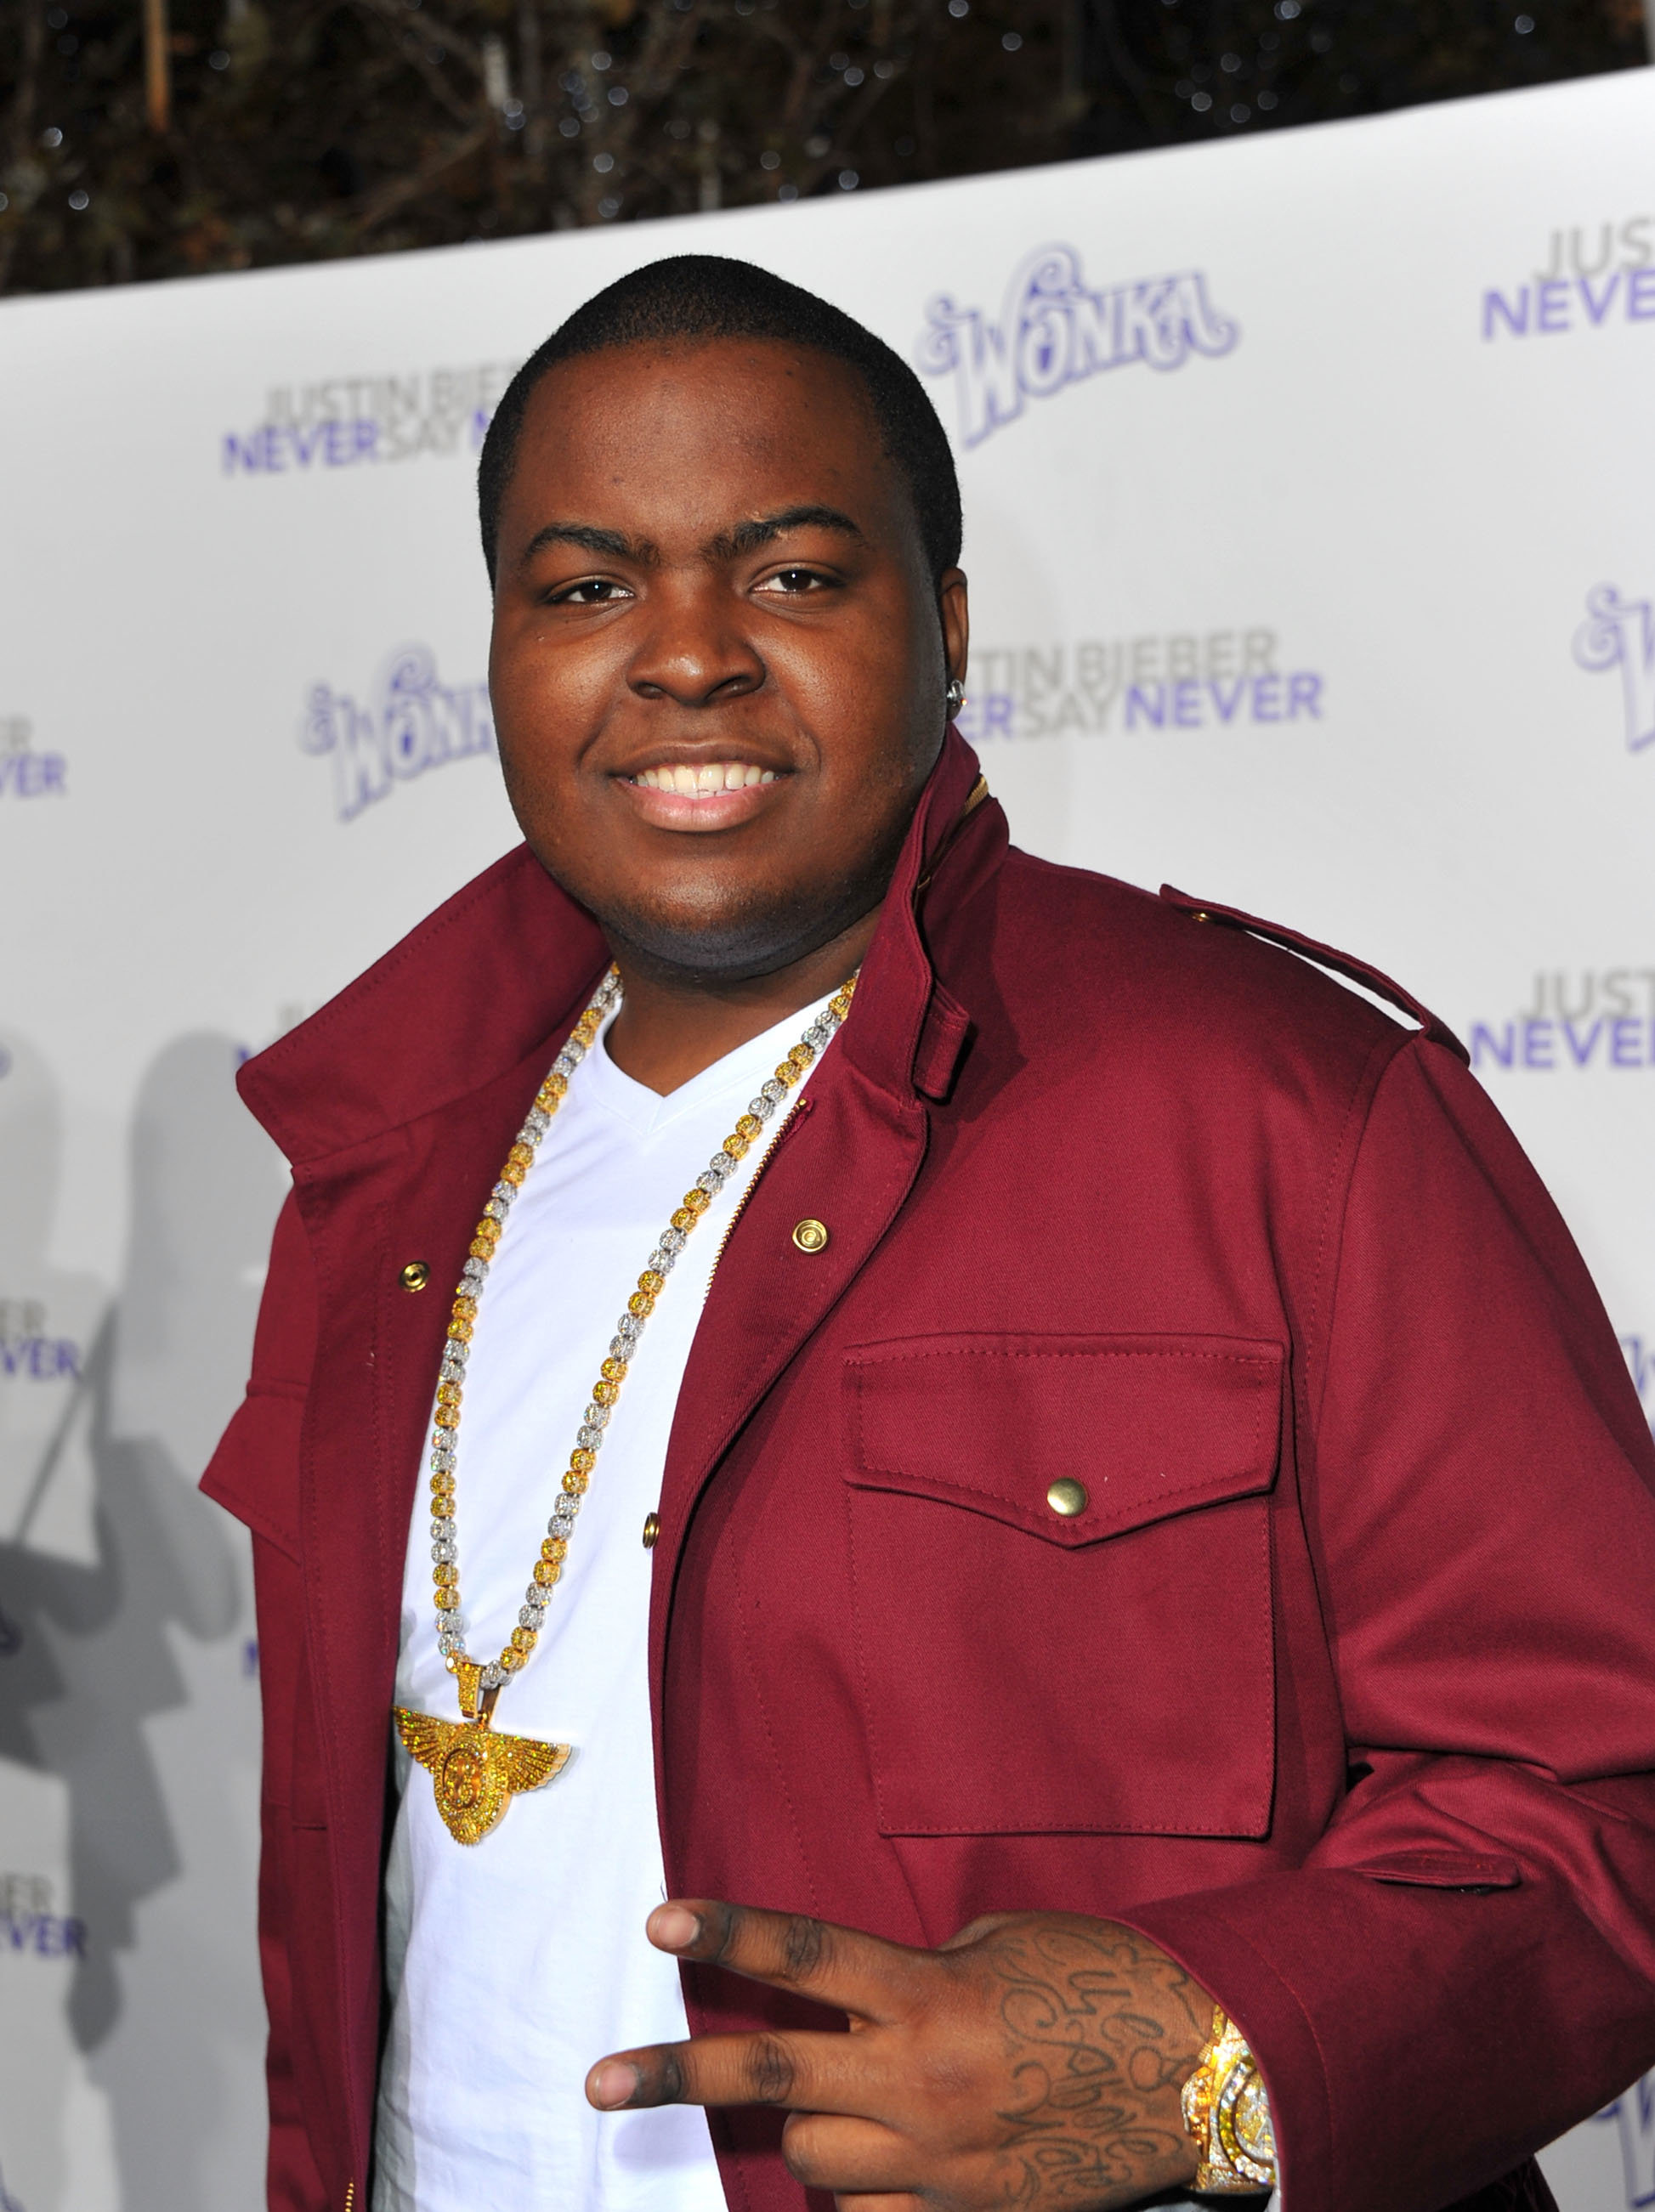 LOS ANGELES - FILE:  Rapper Sean Kingston arrives at the premiere of Paramount Pictures' "Justin Bieber: Never Say Never" held at Nokia Theater L.A. Live on February 8, 2011 in Los Angeles, California.  Sean Kingston has been hospitalized after a jet ski accident in Miami on May 29, 2011 (Photo by Alberto E. Rodriguez/Getty Images for Paramount Pictures)